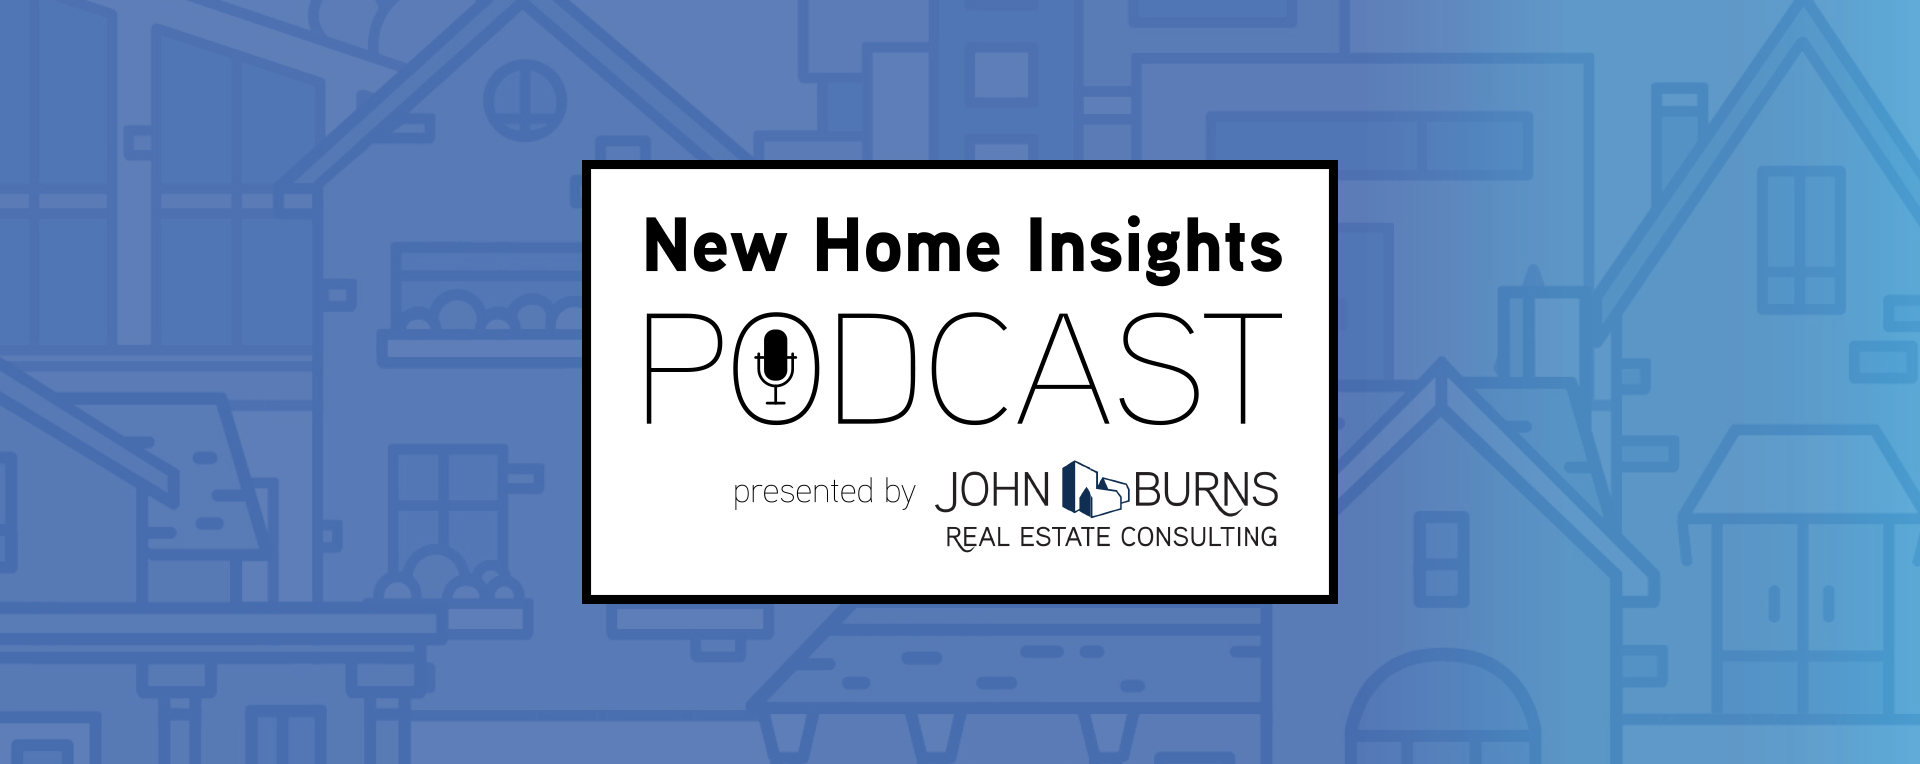 New Home Insights Podcast Design with Confidence Houzz